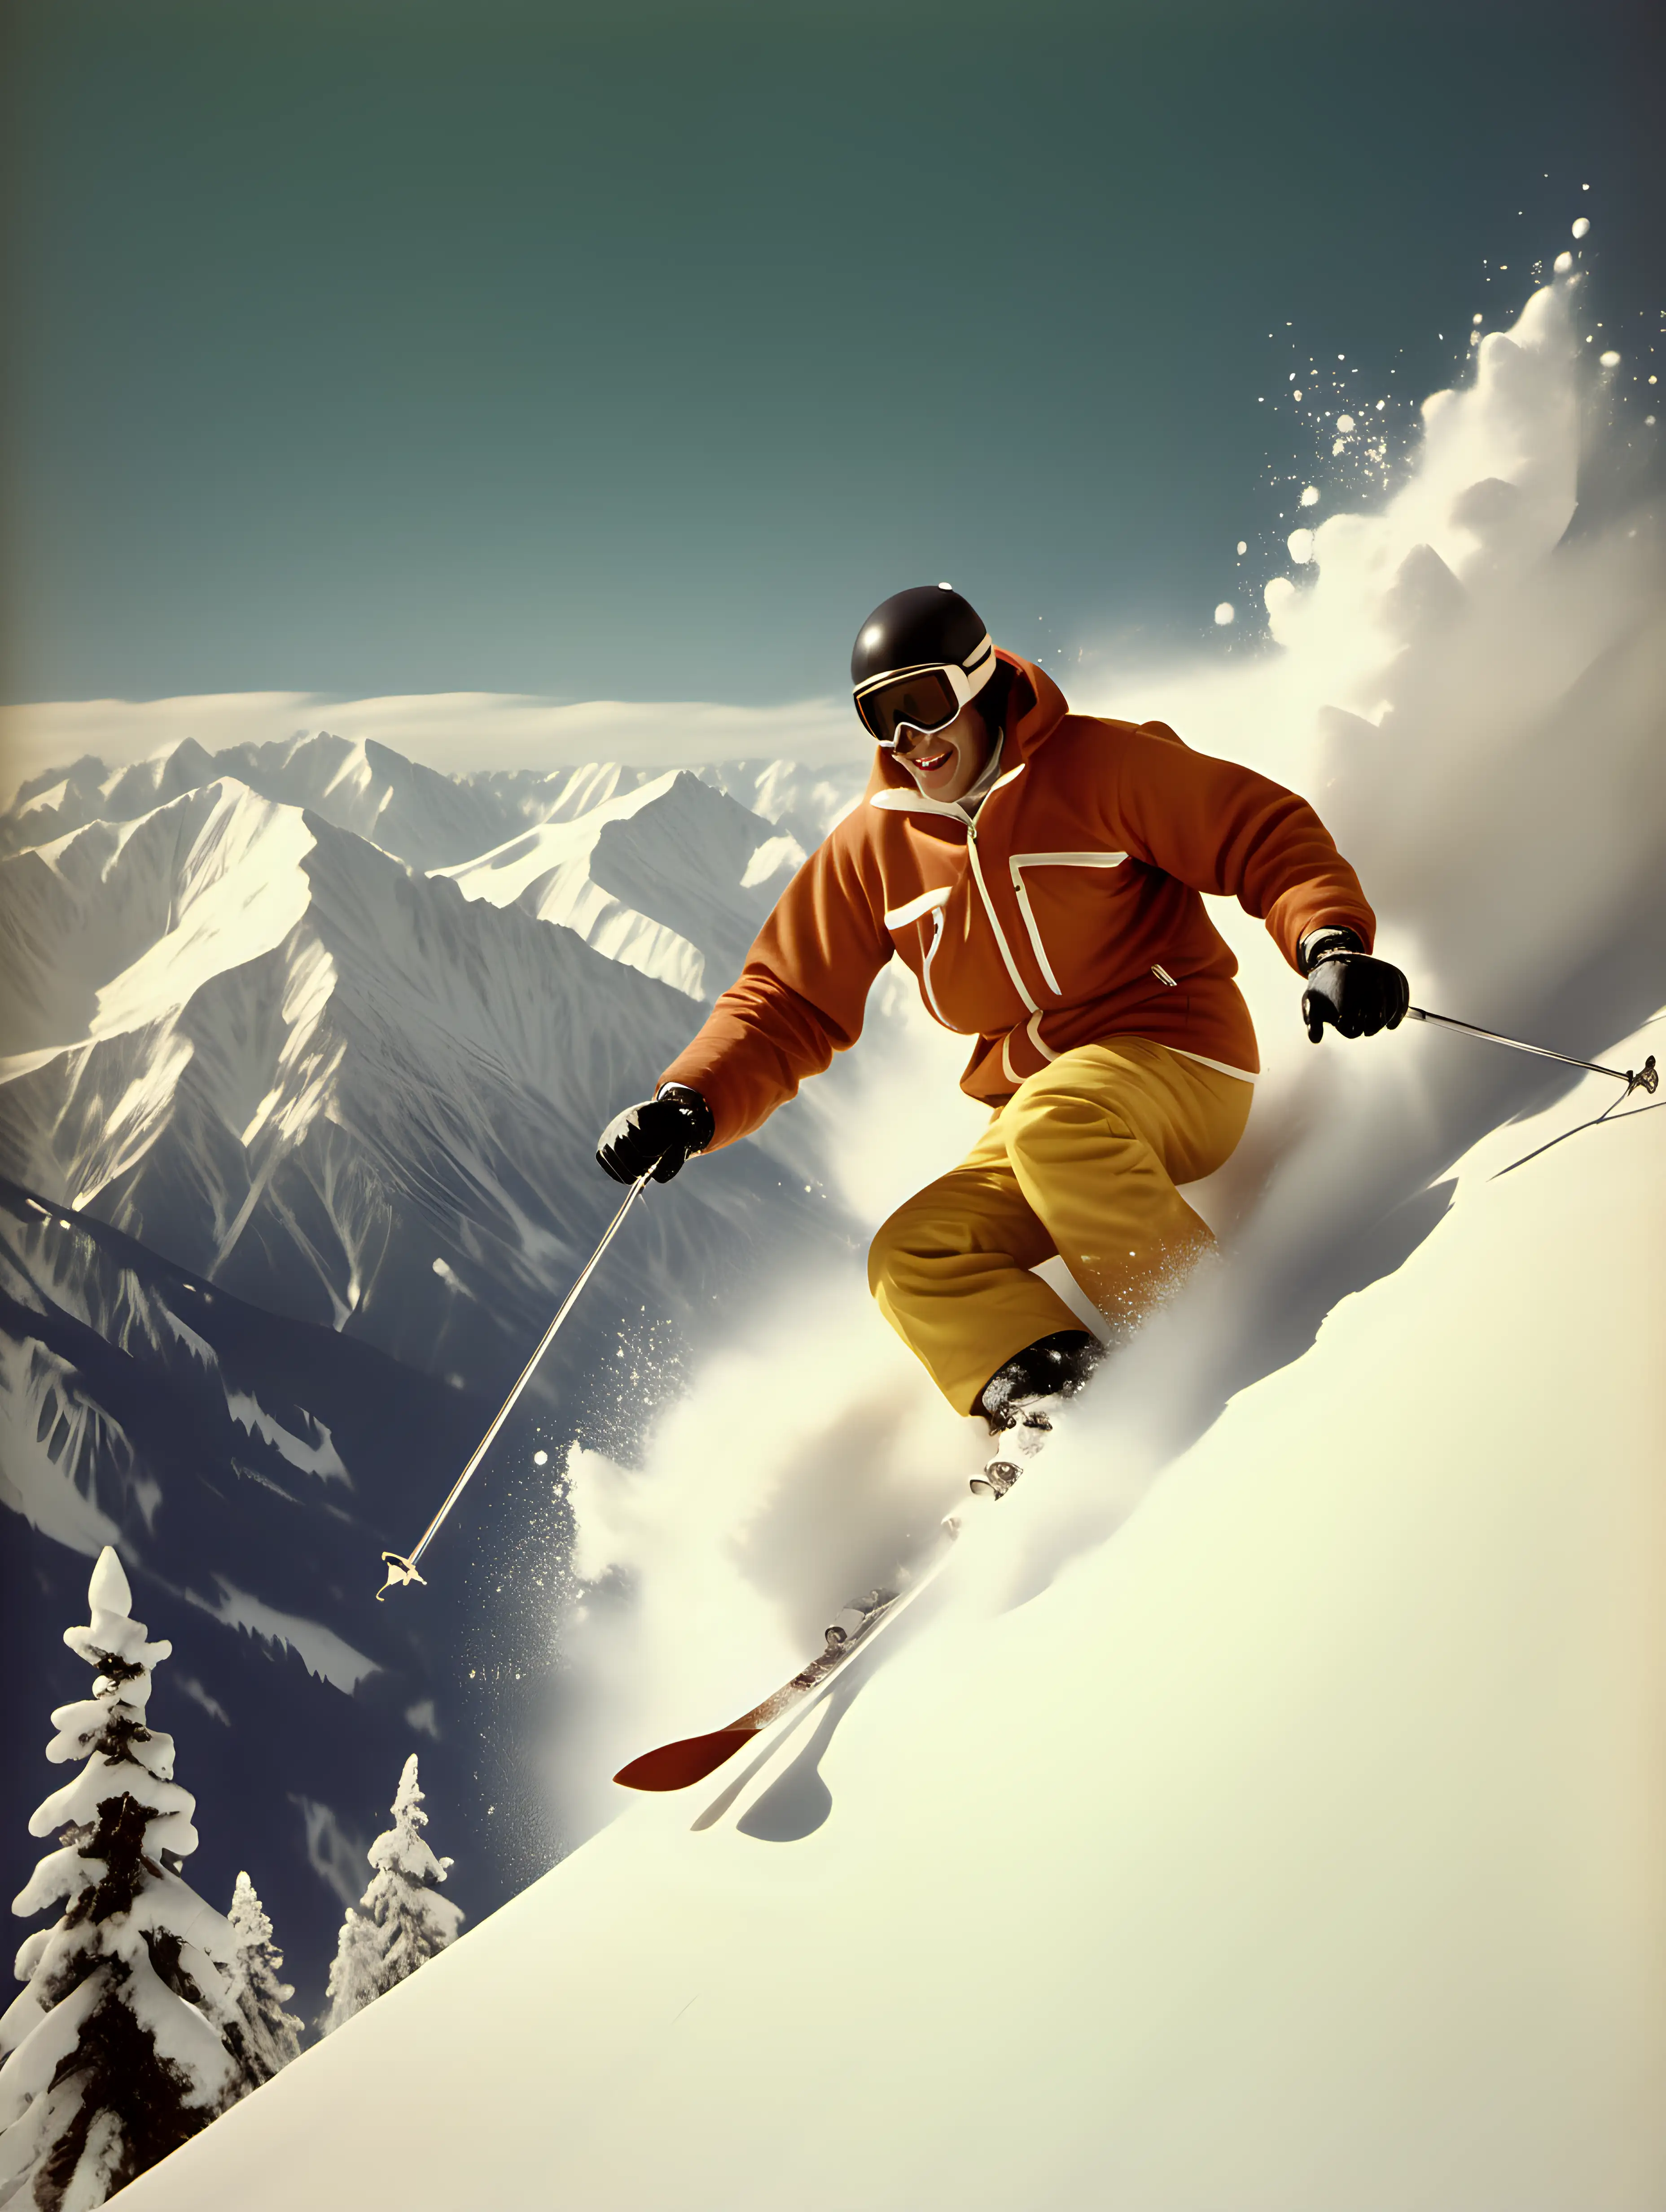 Vintage 70s Skiing Adventure in Snowy Mountains